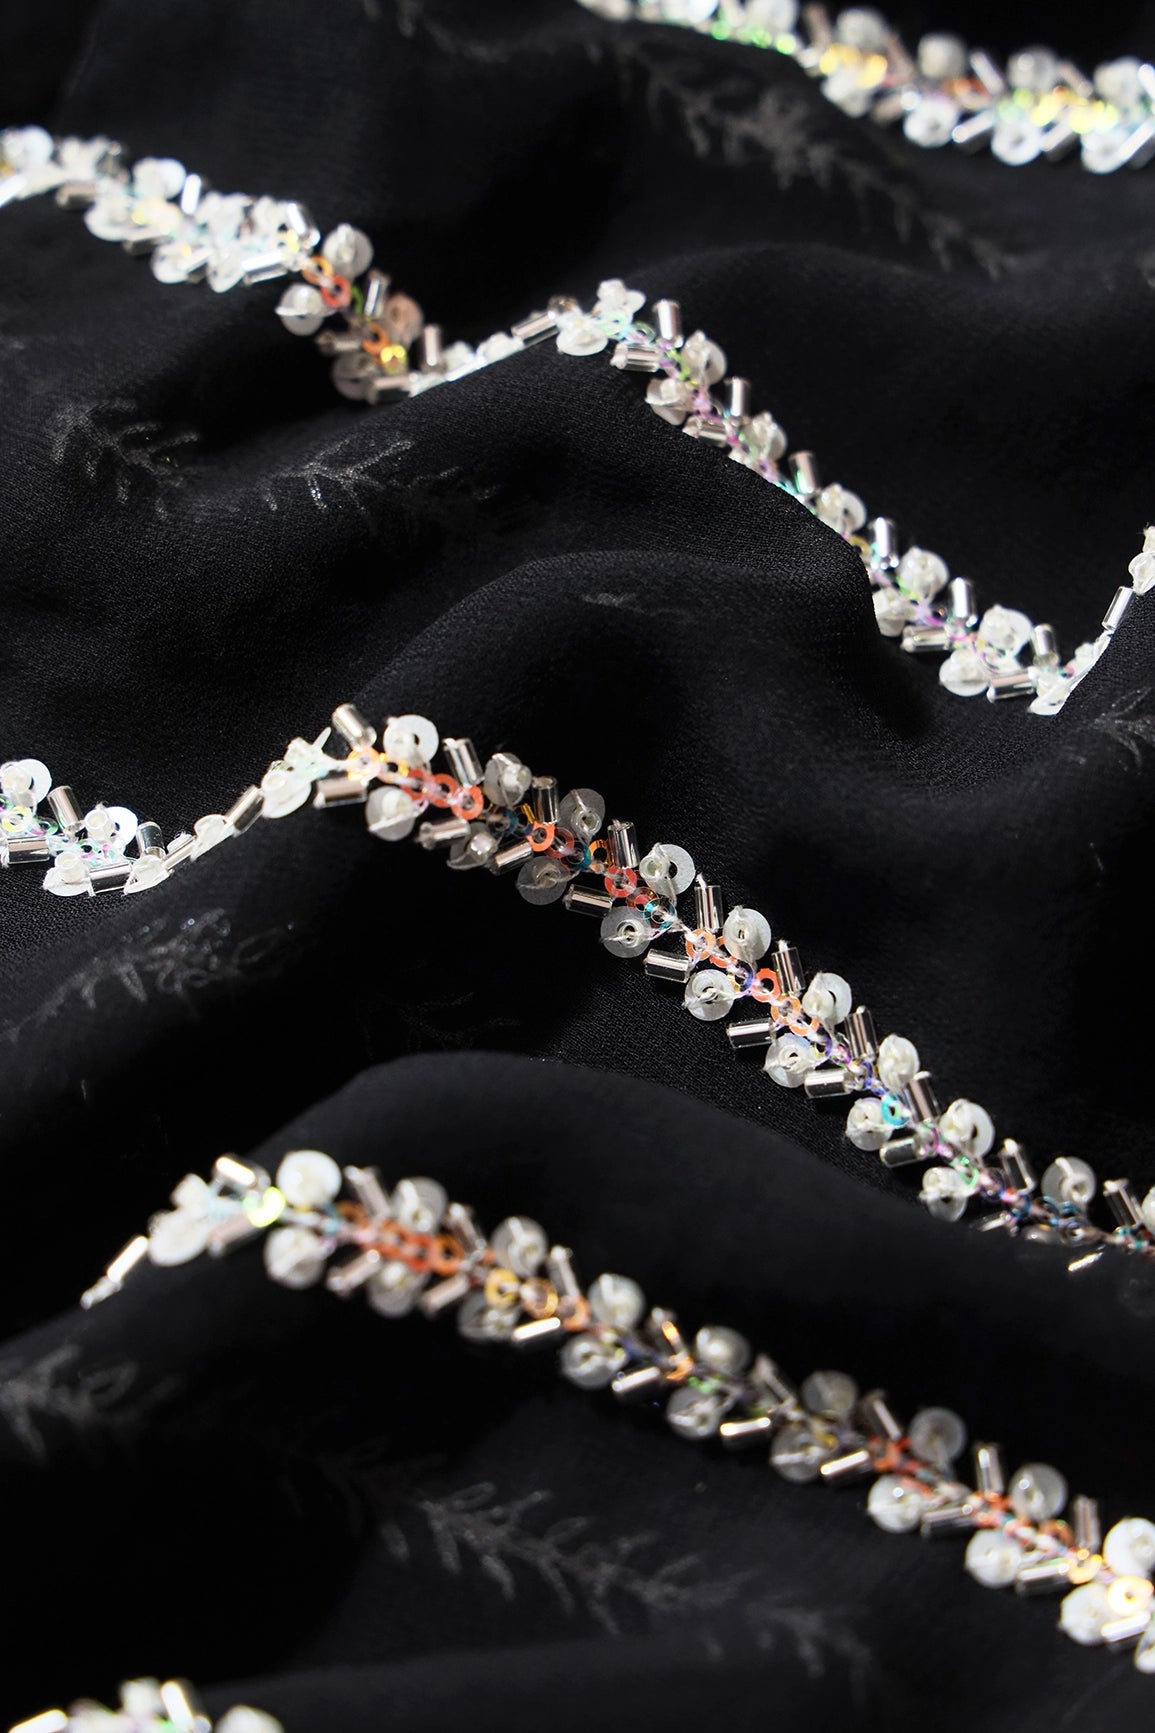 Silver Beads With Sequins Beautiful Stripes Handwork Embroidery On Black Viscose Georgette Fabric